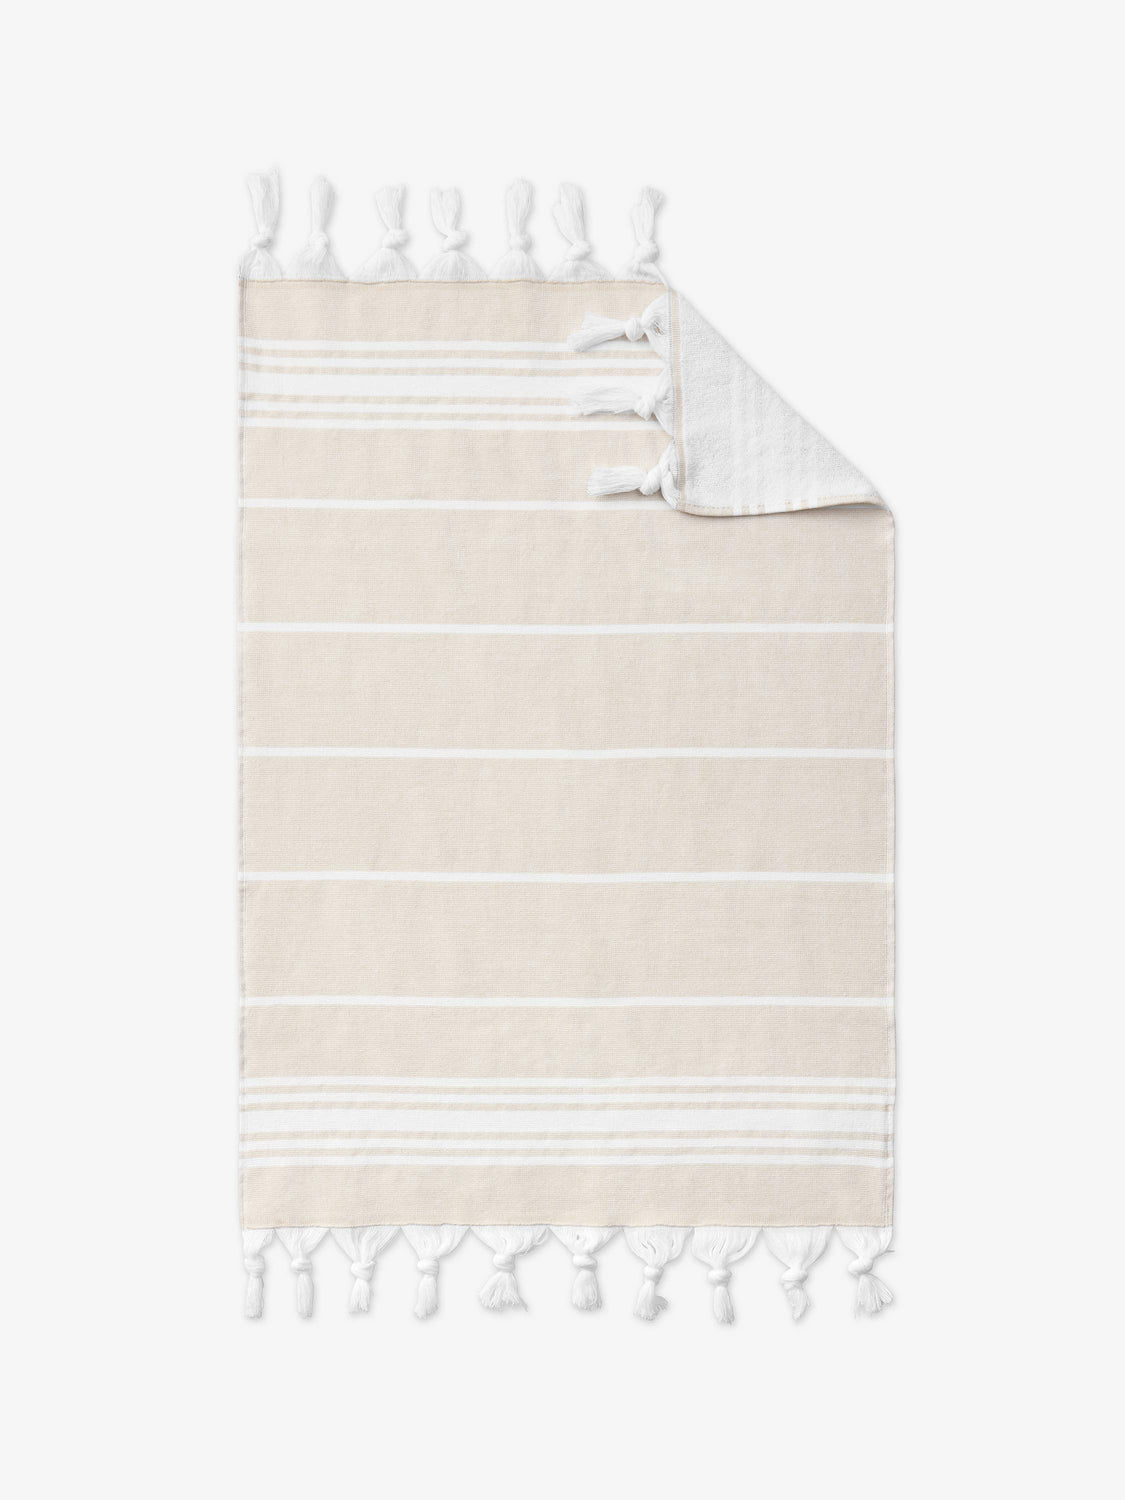 An oversized, tan and white striped Turkish cotton hand towel with white fringe laid out. 